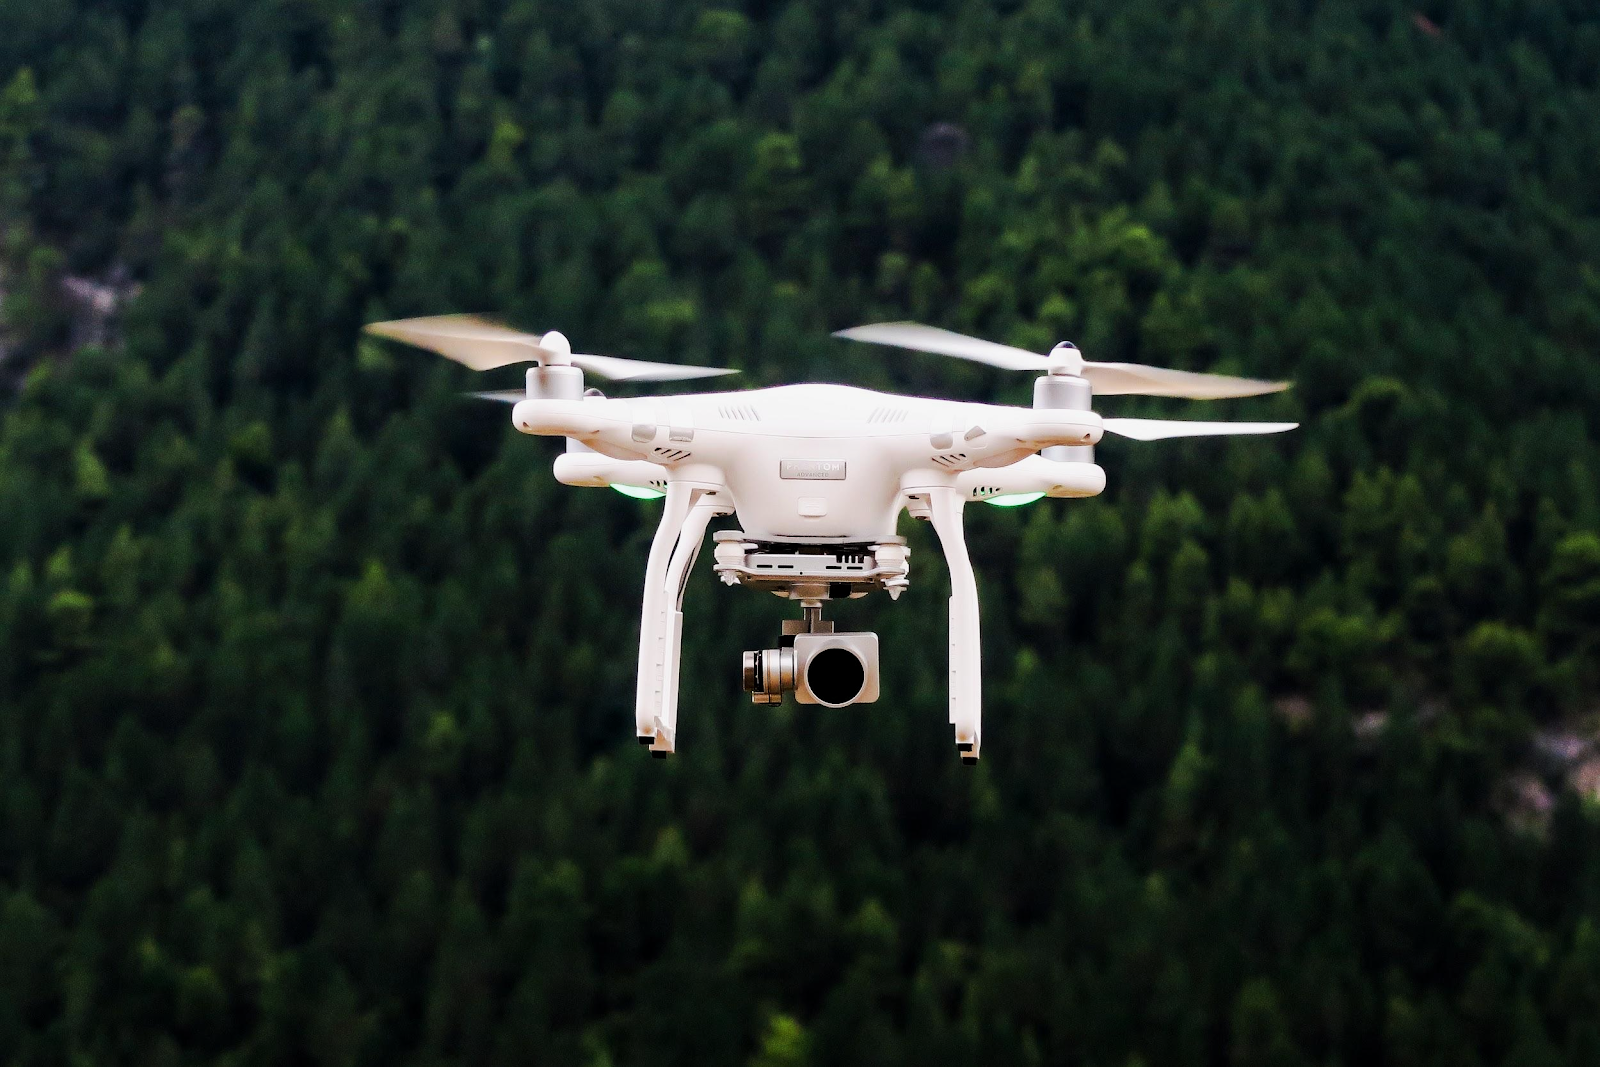 Businesses That Can Benefit From Using Drones